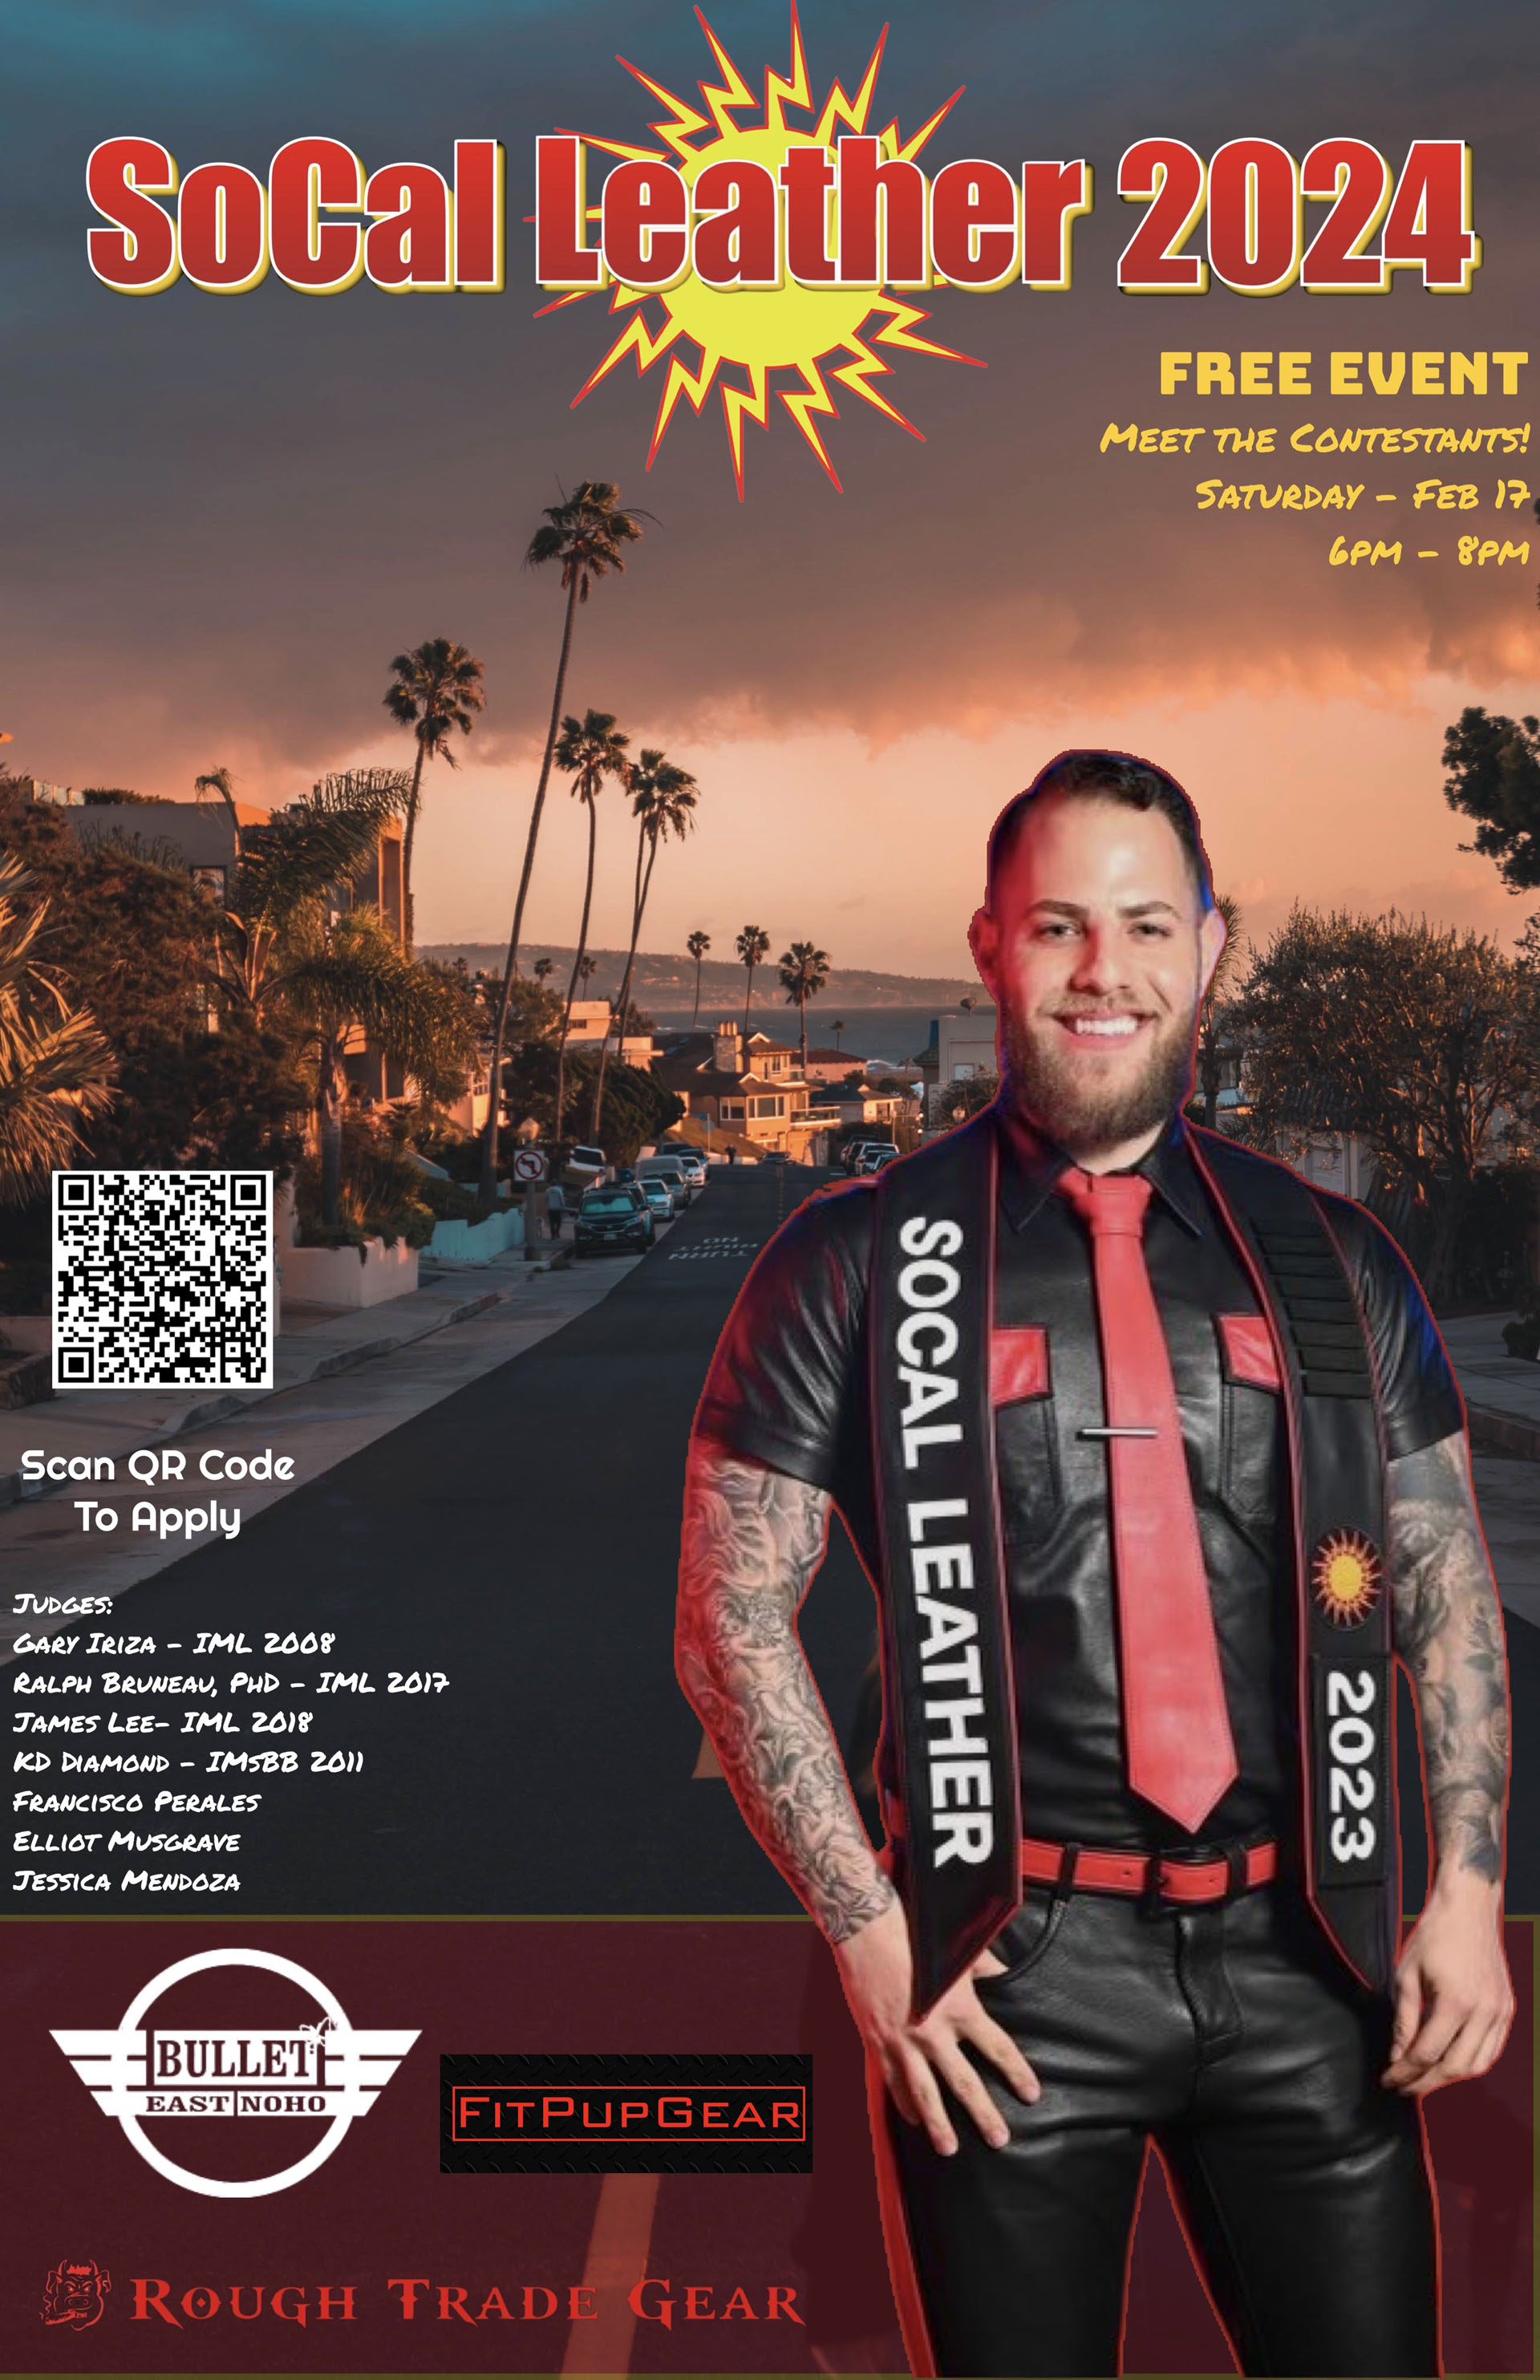 THE BULLET BAR and SOCAL LEATHER Present SoCAL LEATHER 2024 MEET THE CONTESTANTS: Saturday, 02/17/24 from 6:00 PM to 8:00 PM! No cover.